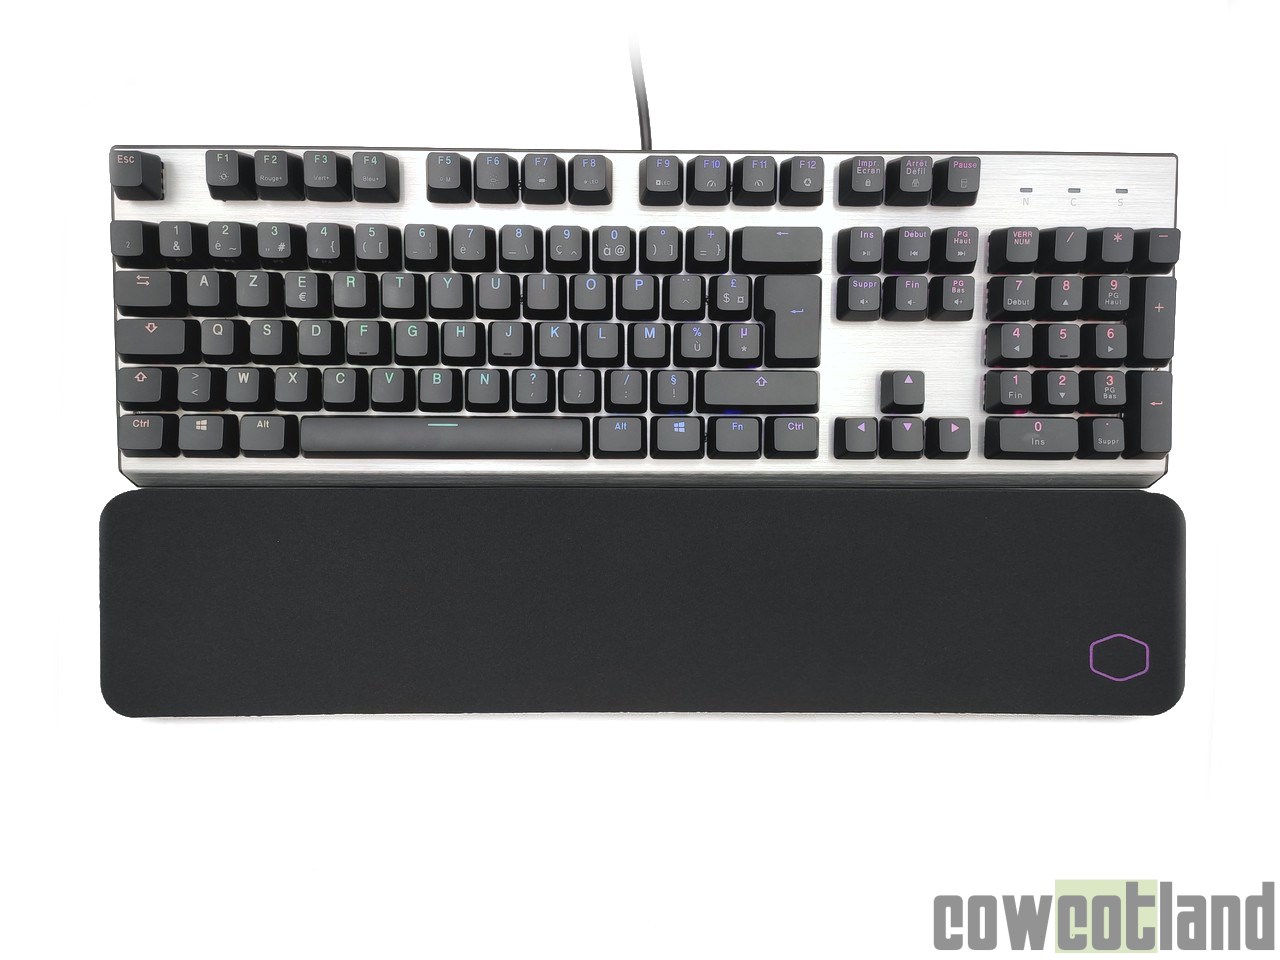 Image 46359, galerie Test clavier mcanique Cooler Master CK351 : switches optiques et hot-swappables !